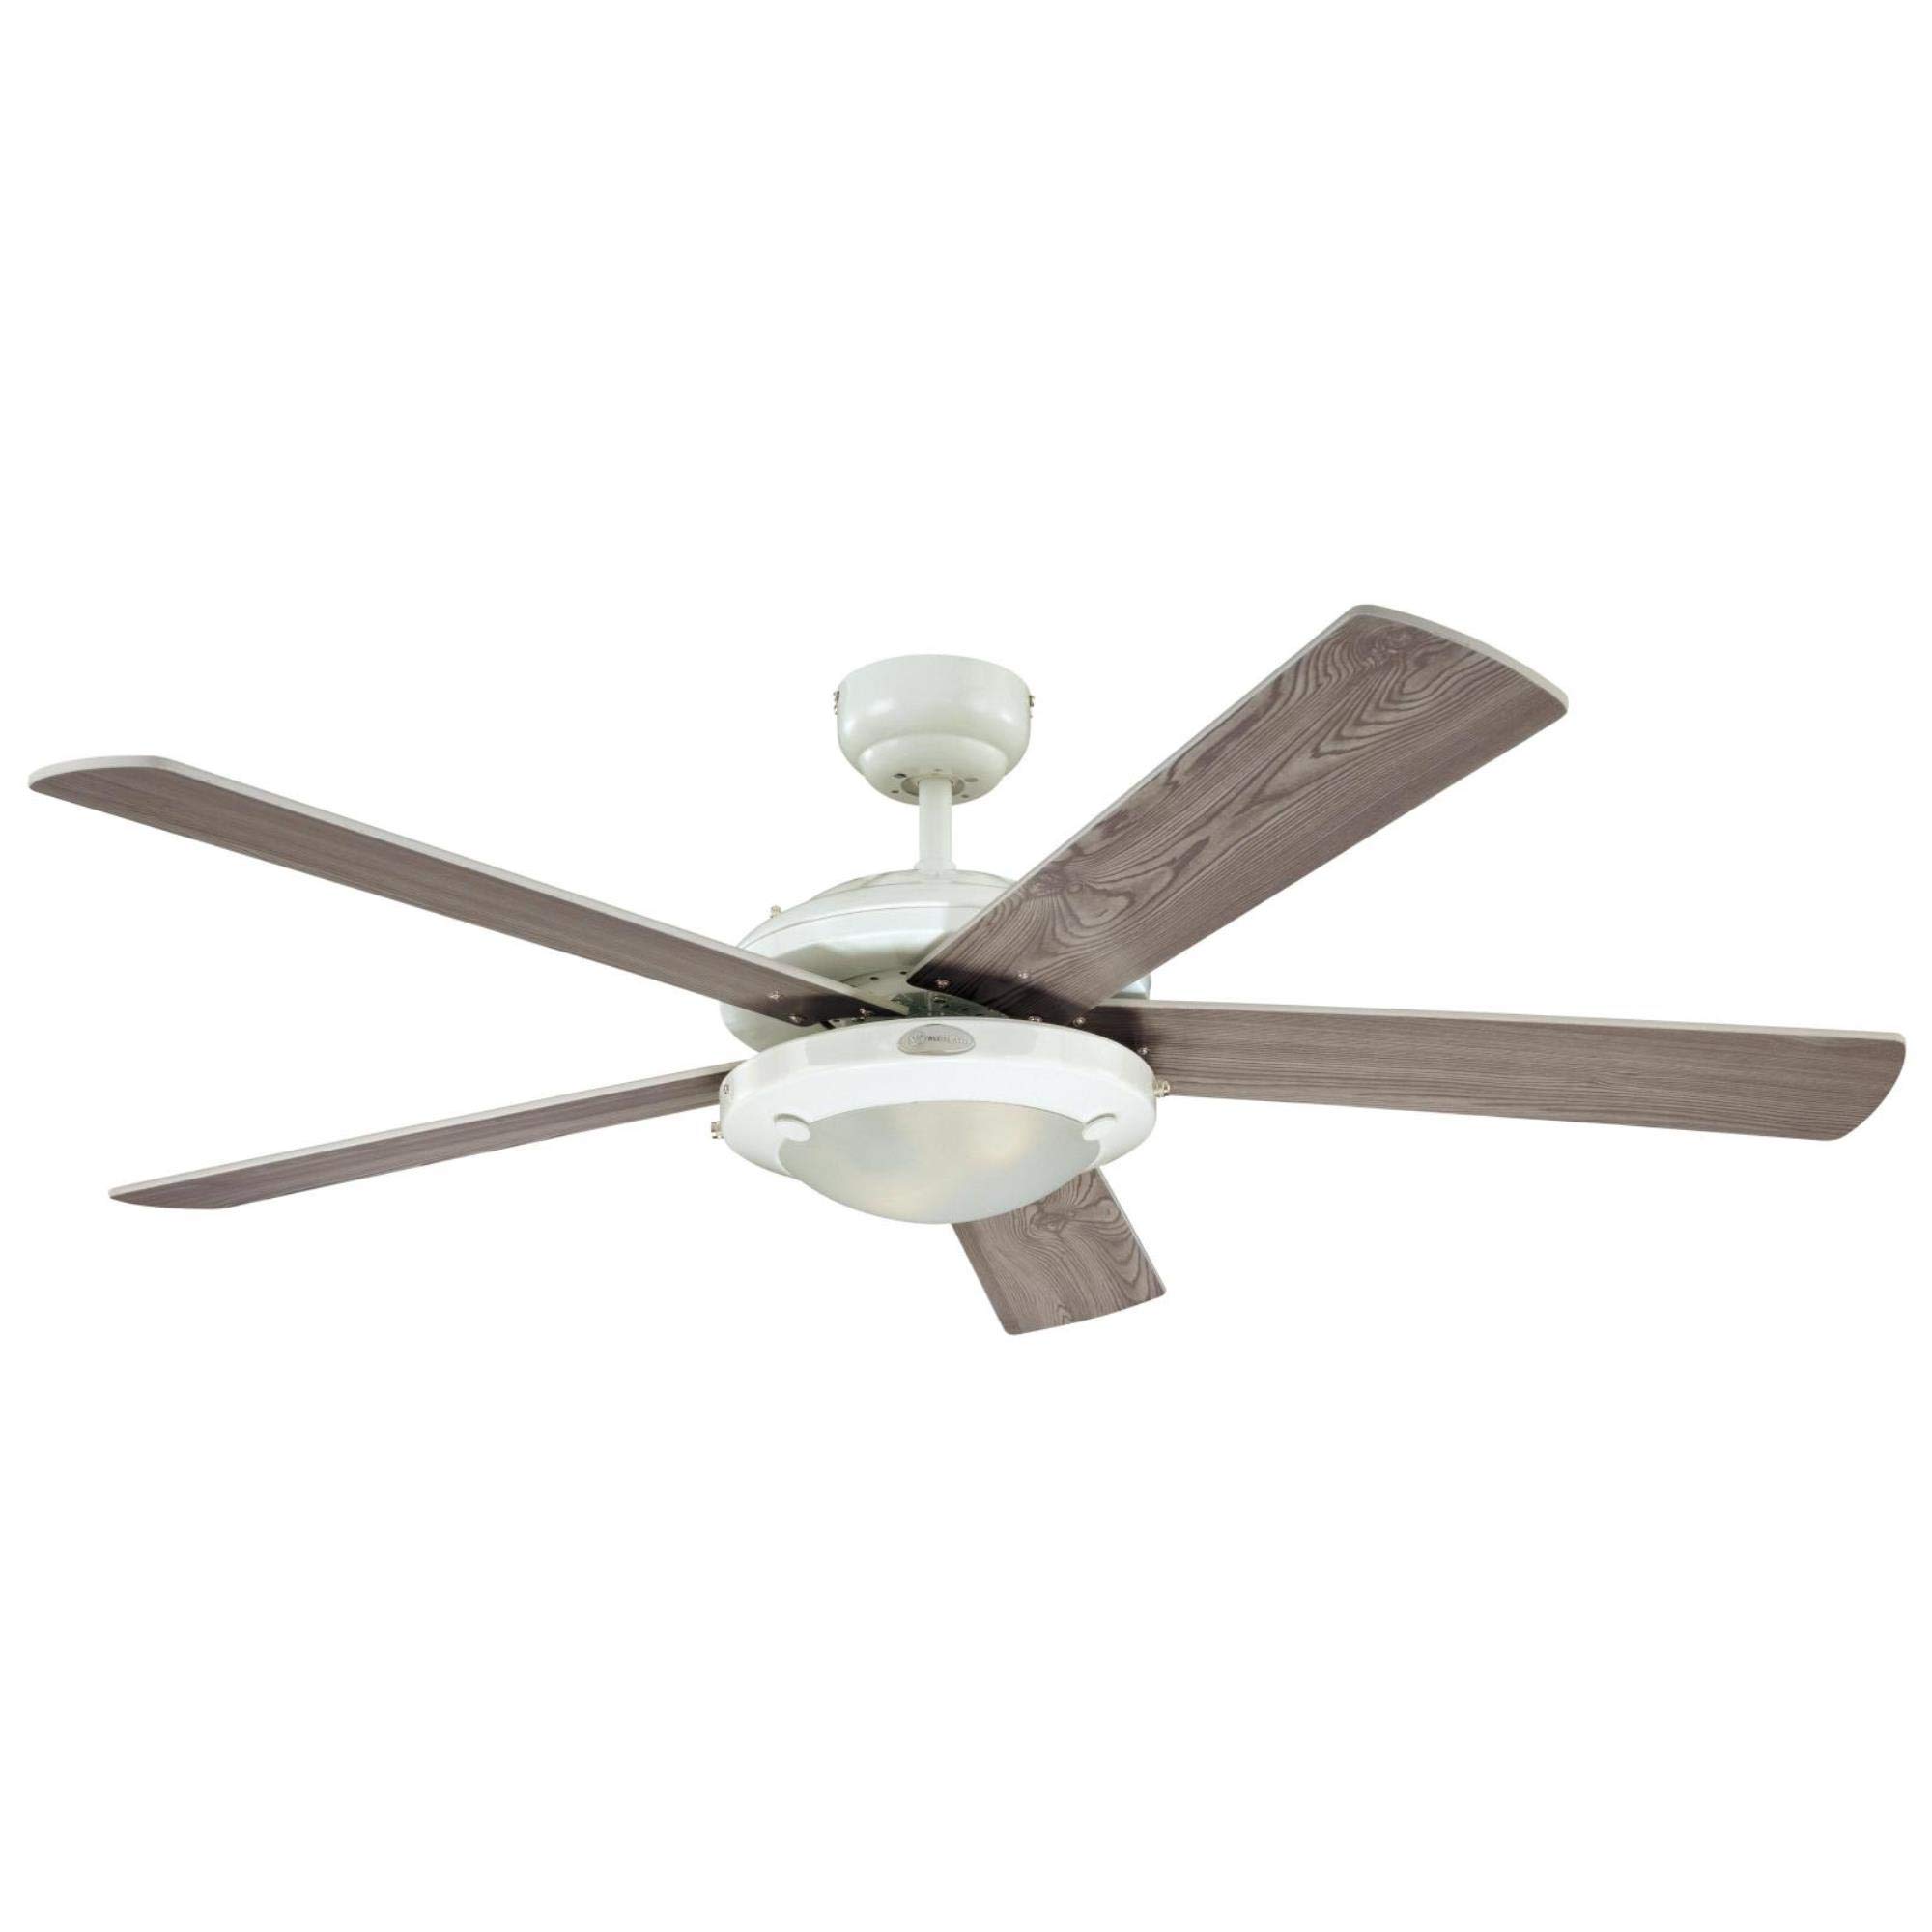 Westinghouse Lighting 7233600 Comet Indoor Ceiling Fan with Light, White